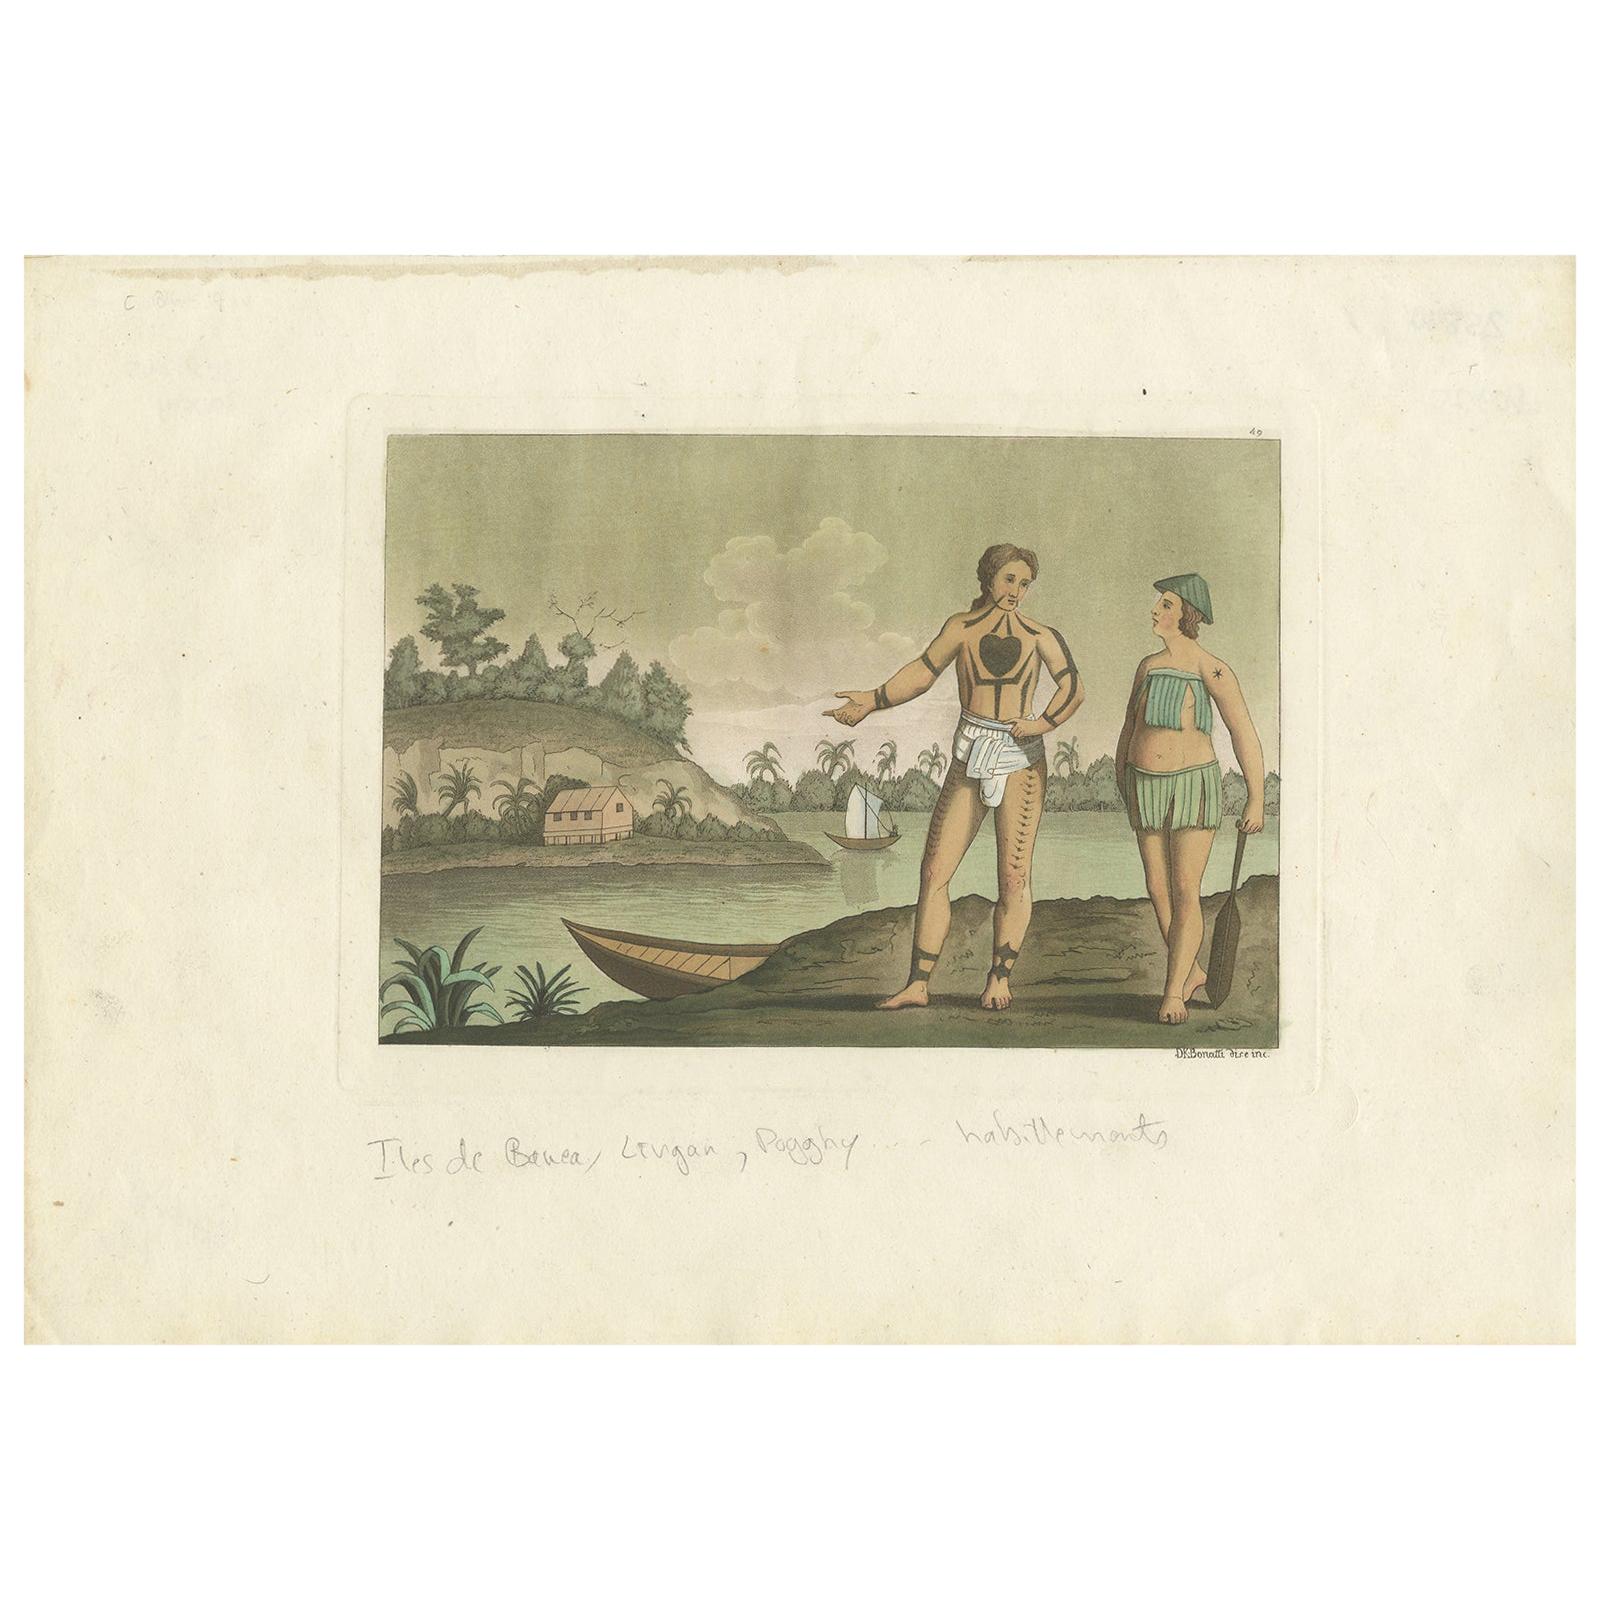 Old Hand-Colored Antique Print of Banae Inhabitants with Body Tattoos, 1827